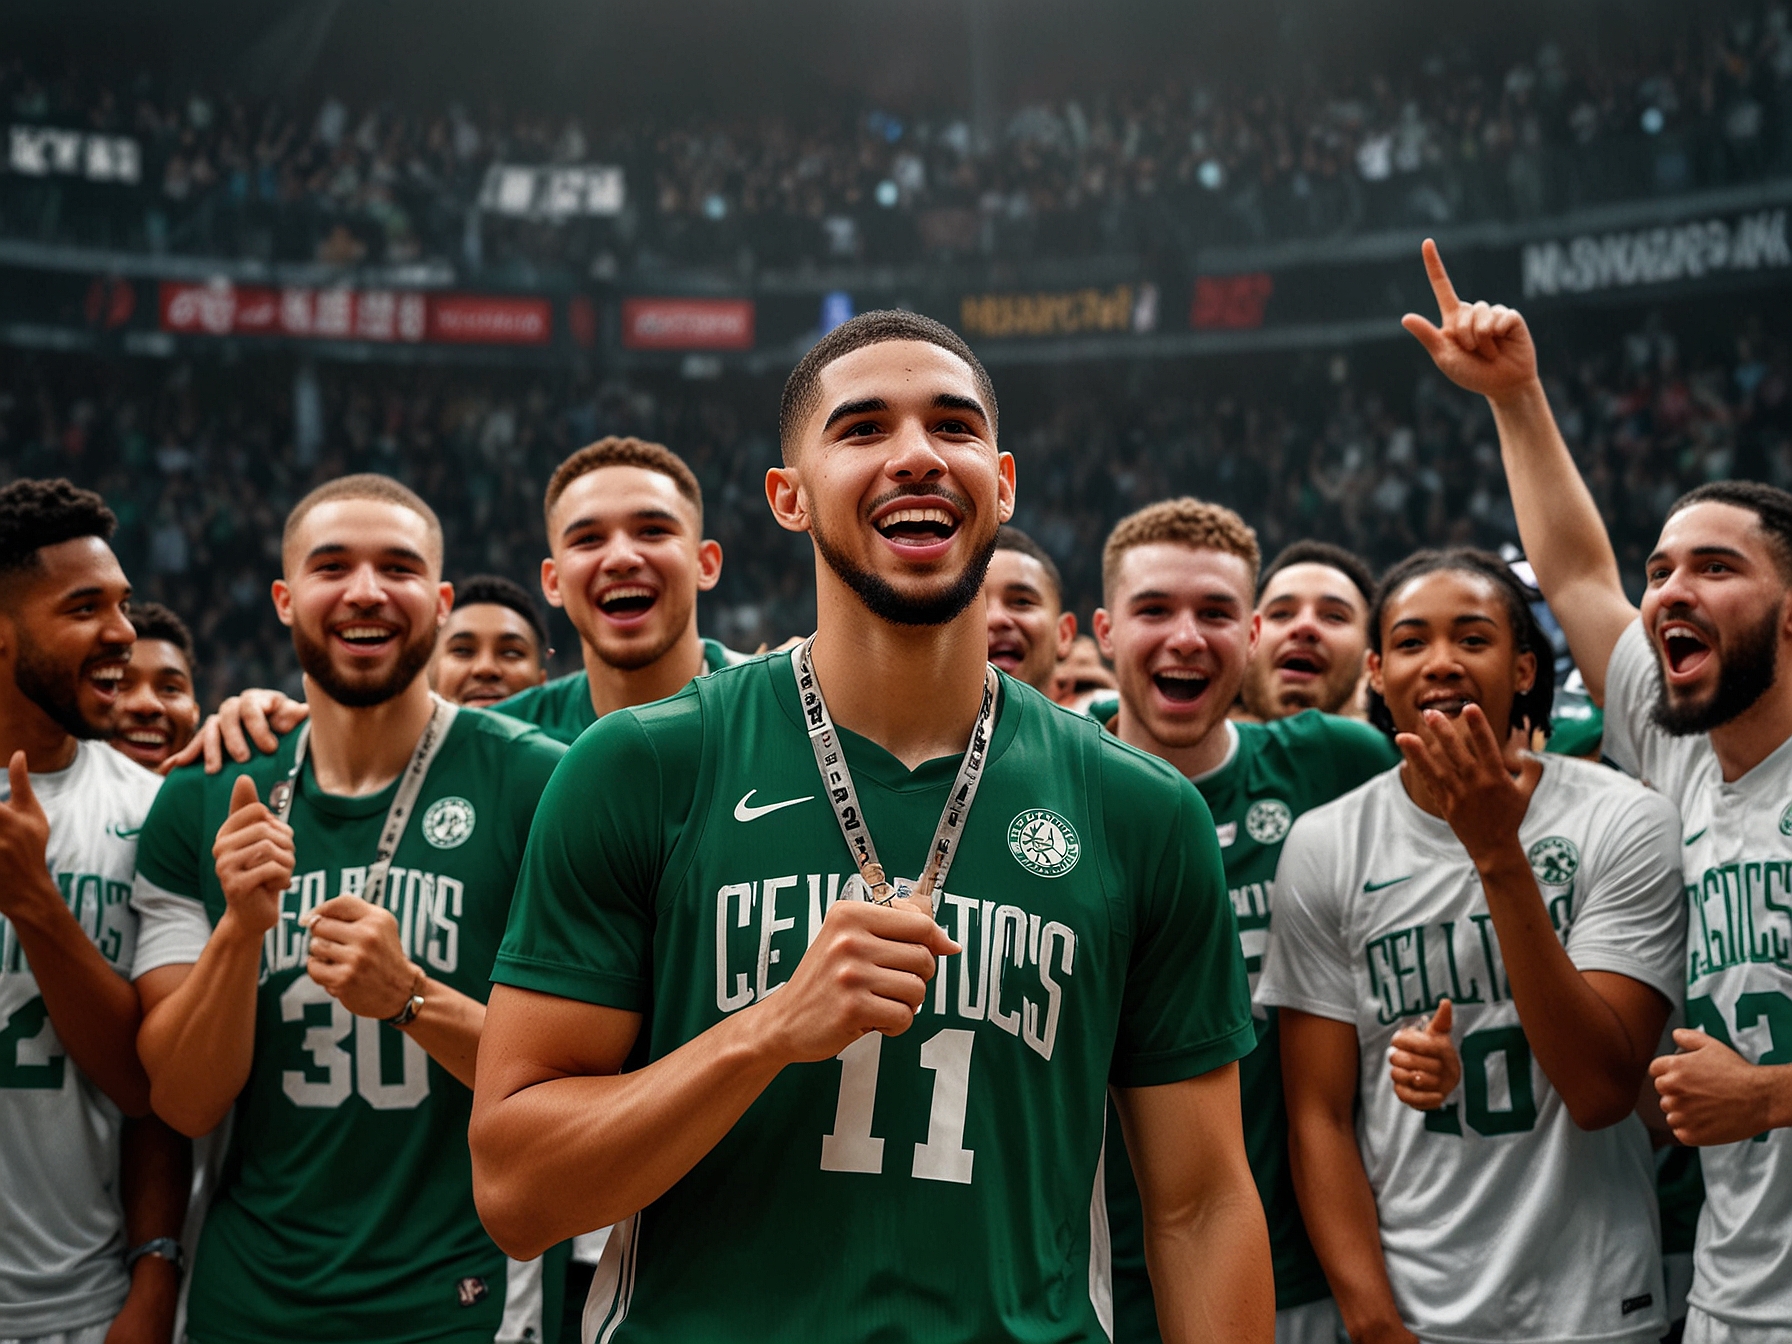 Jayson Tatum, visibly emotional, holding the NBA Championship trophy, surrounded by cheering teammates and fans. His expression of joy captures the essence of the Celtics' hard-earned victory.